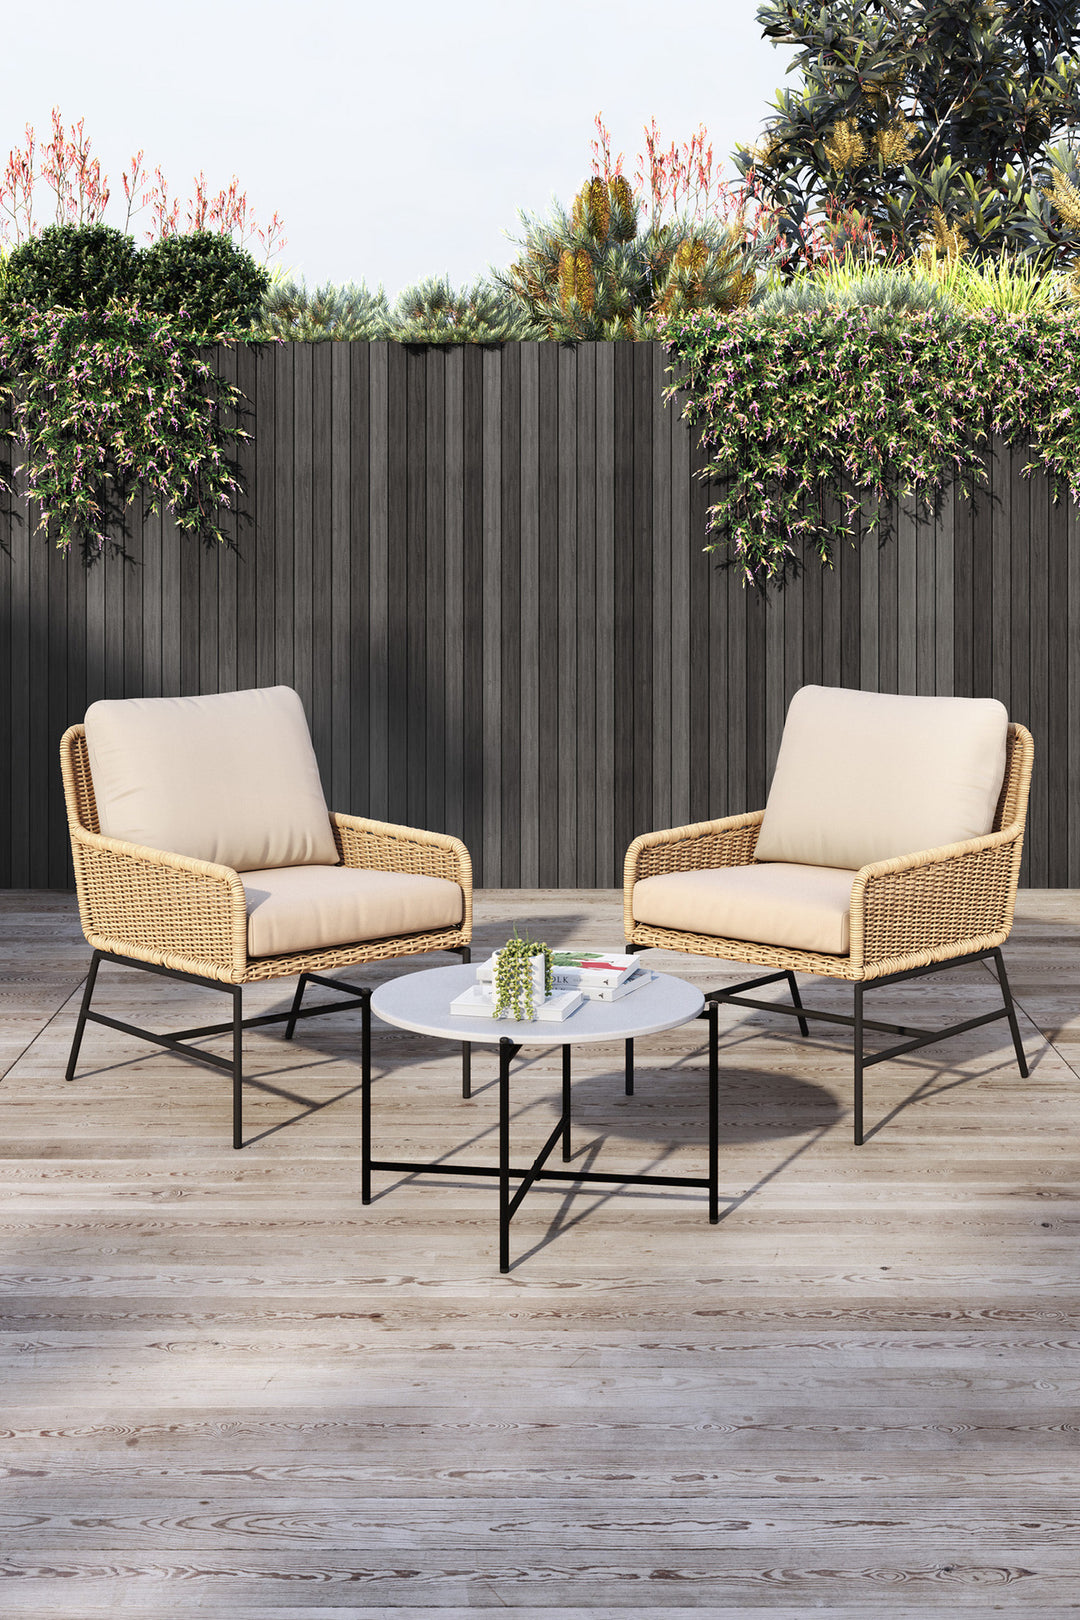 Bevy Outdoor Patio Seating Set 2 Chairs and 1 Table Set (Honey)